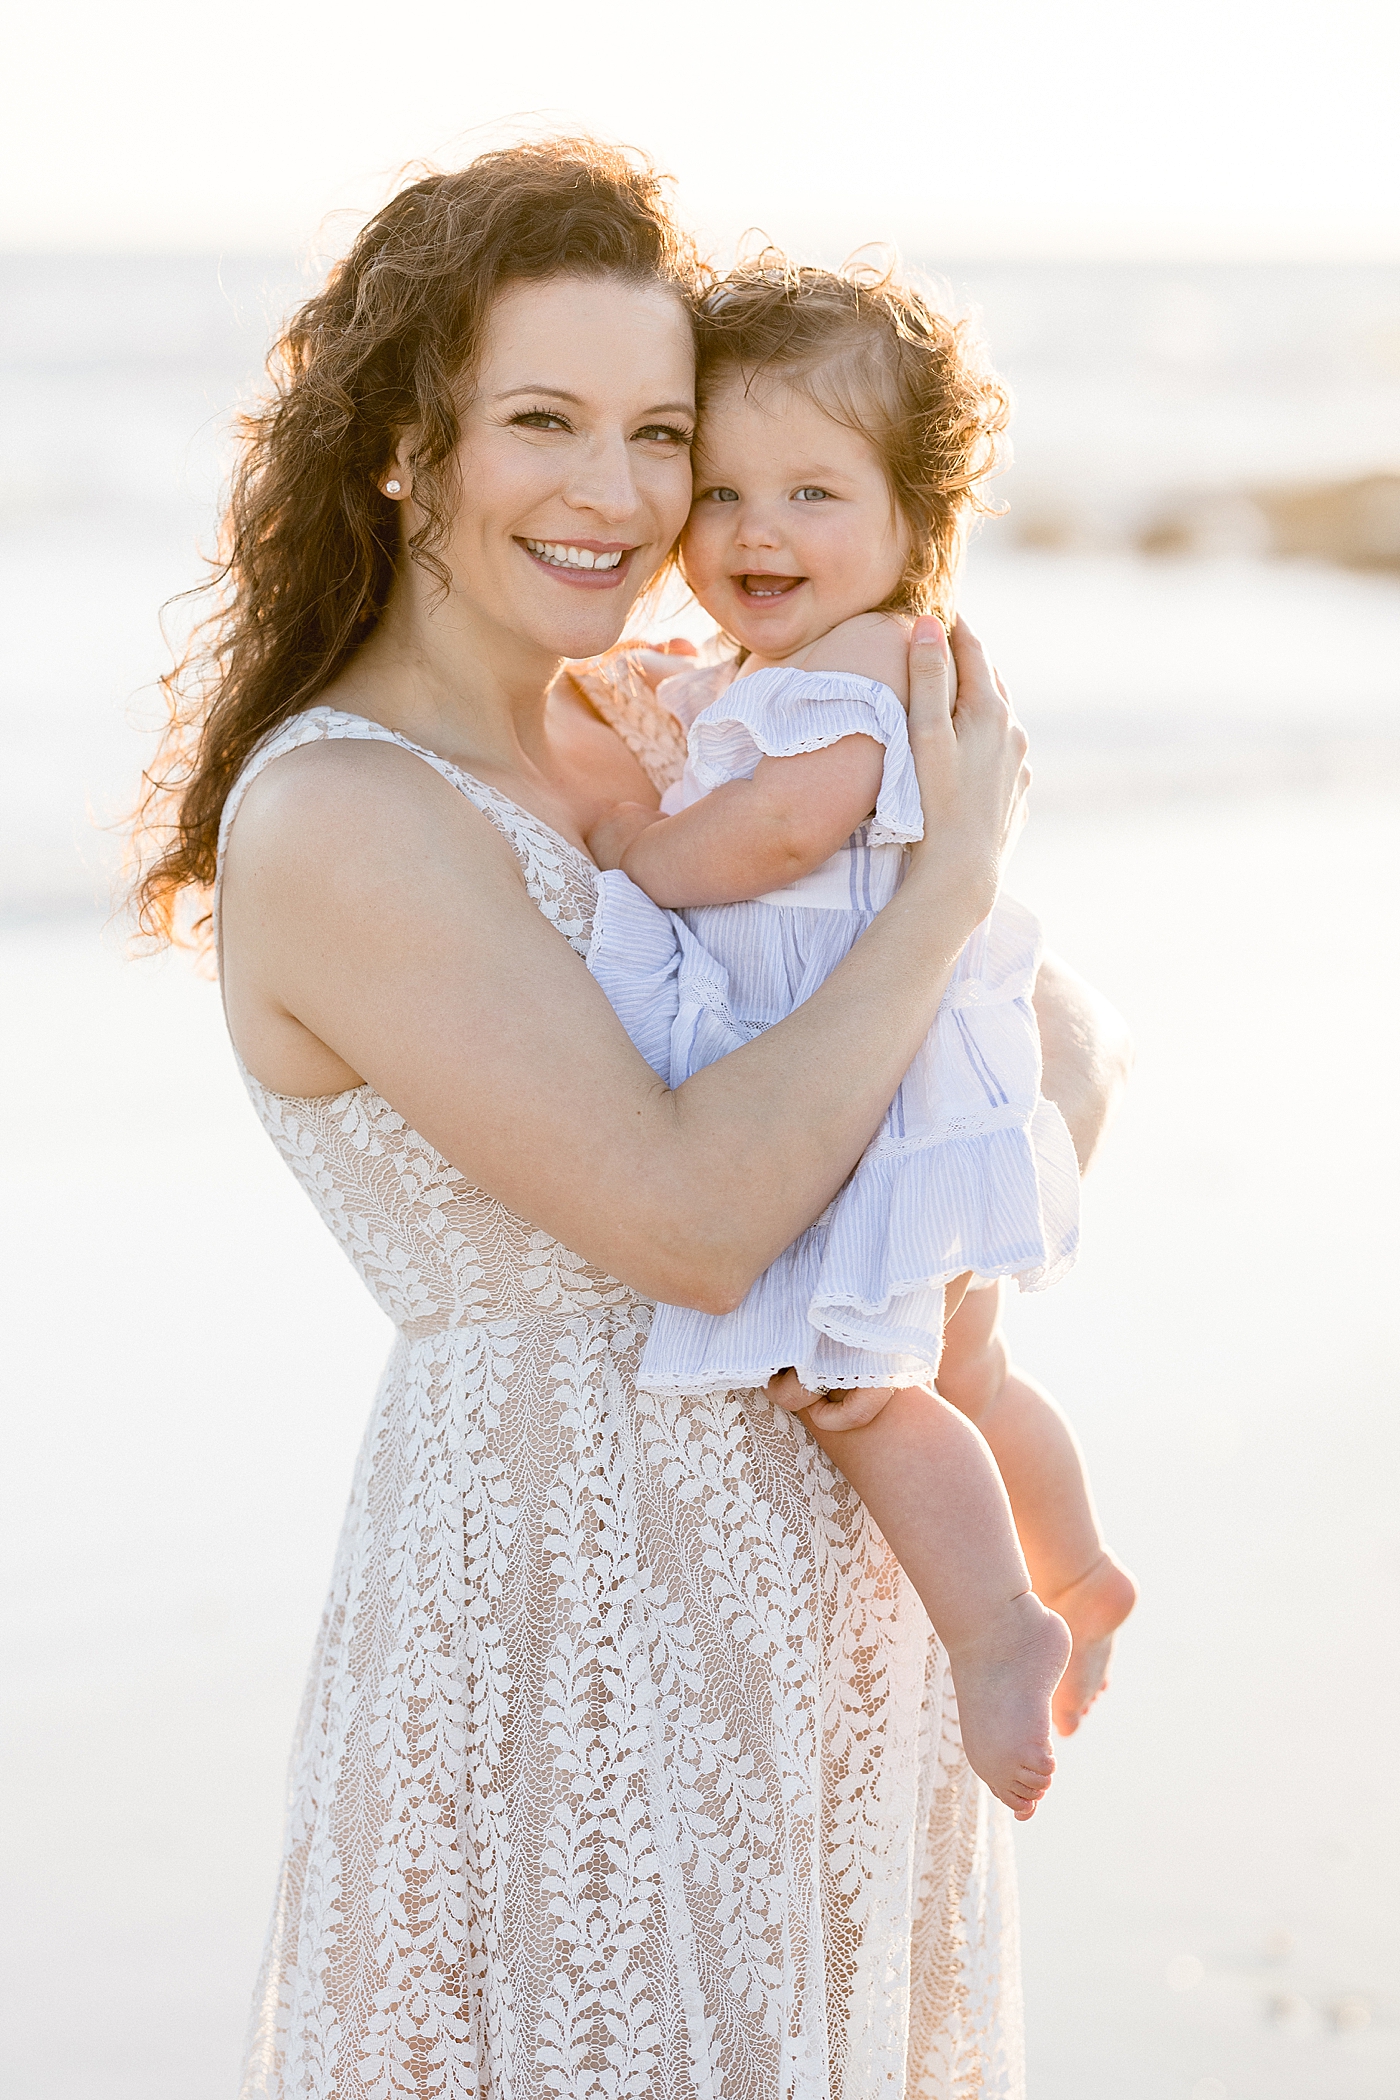 Mom holding baby girl on the beach for sunset photos. Photo by Brittany Elise Photography.